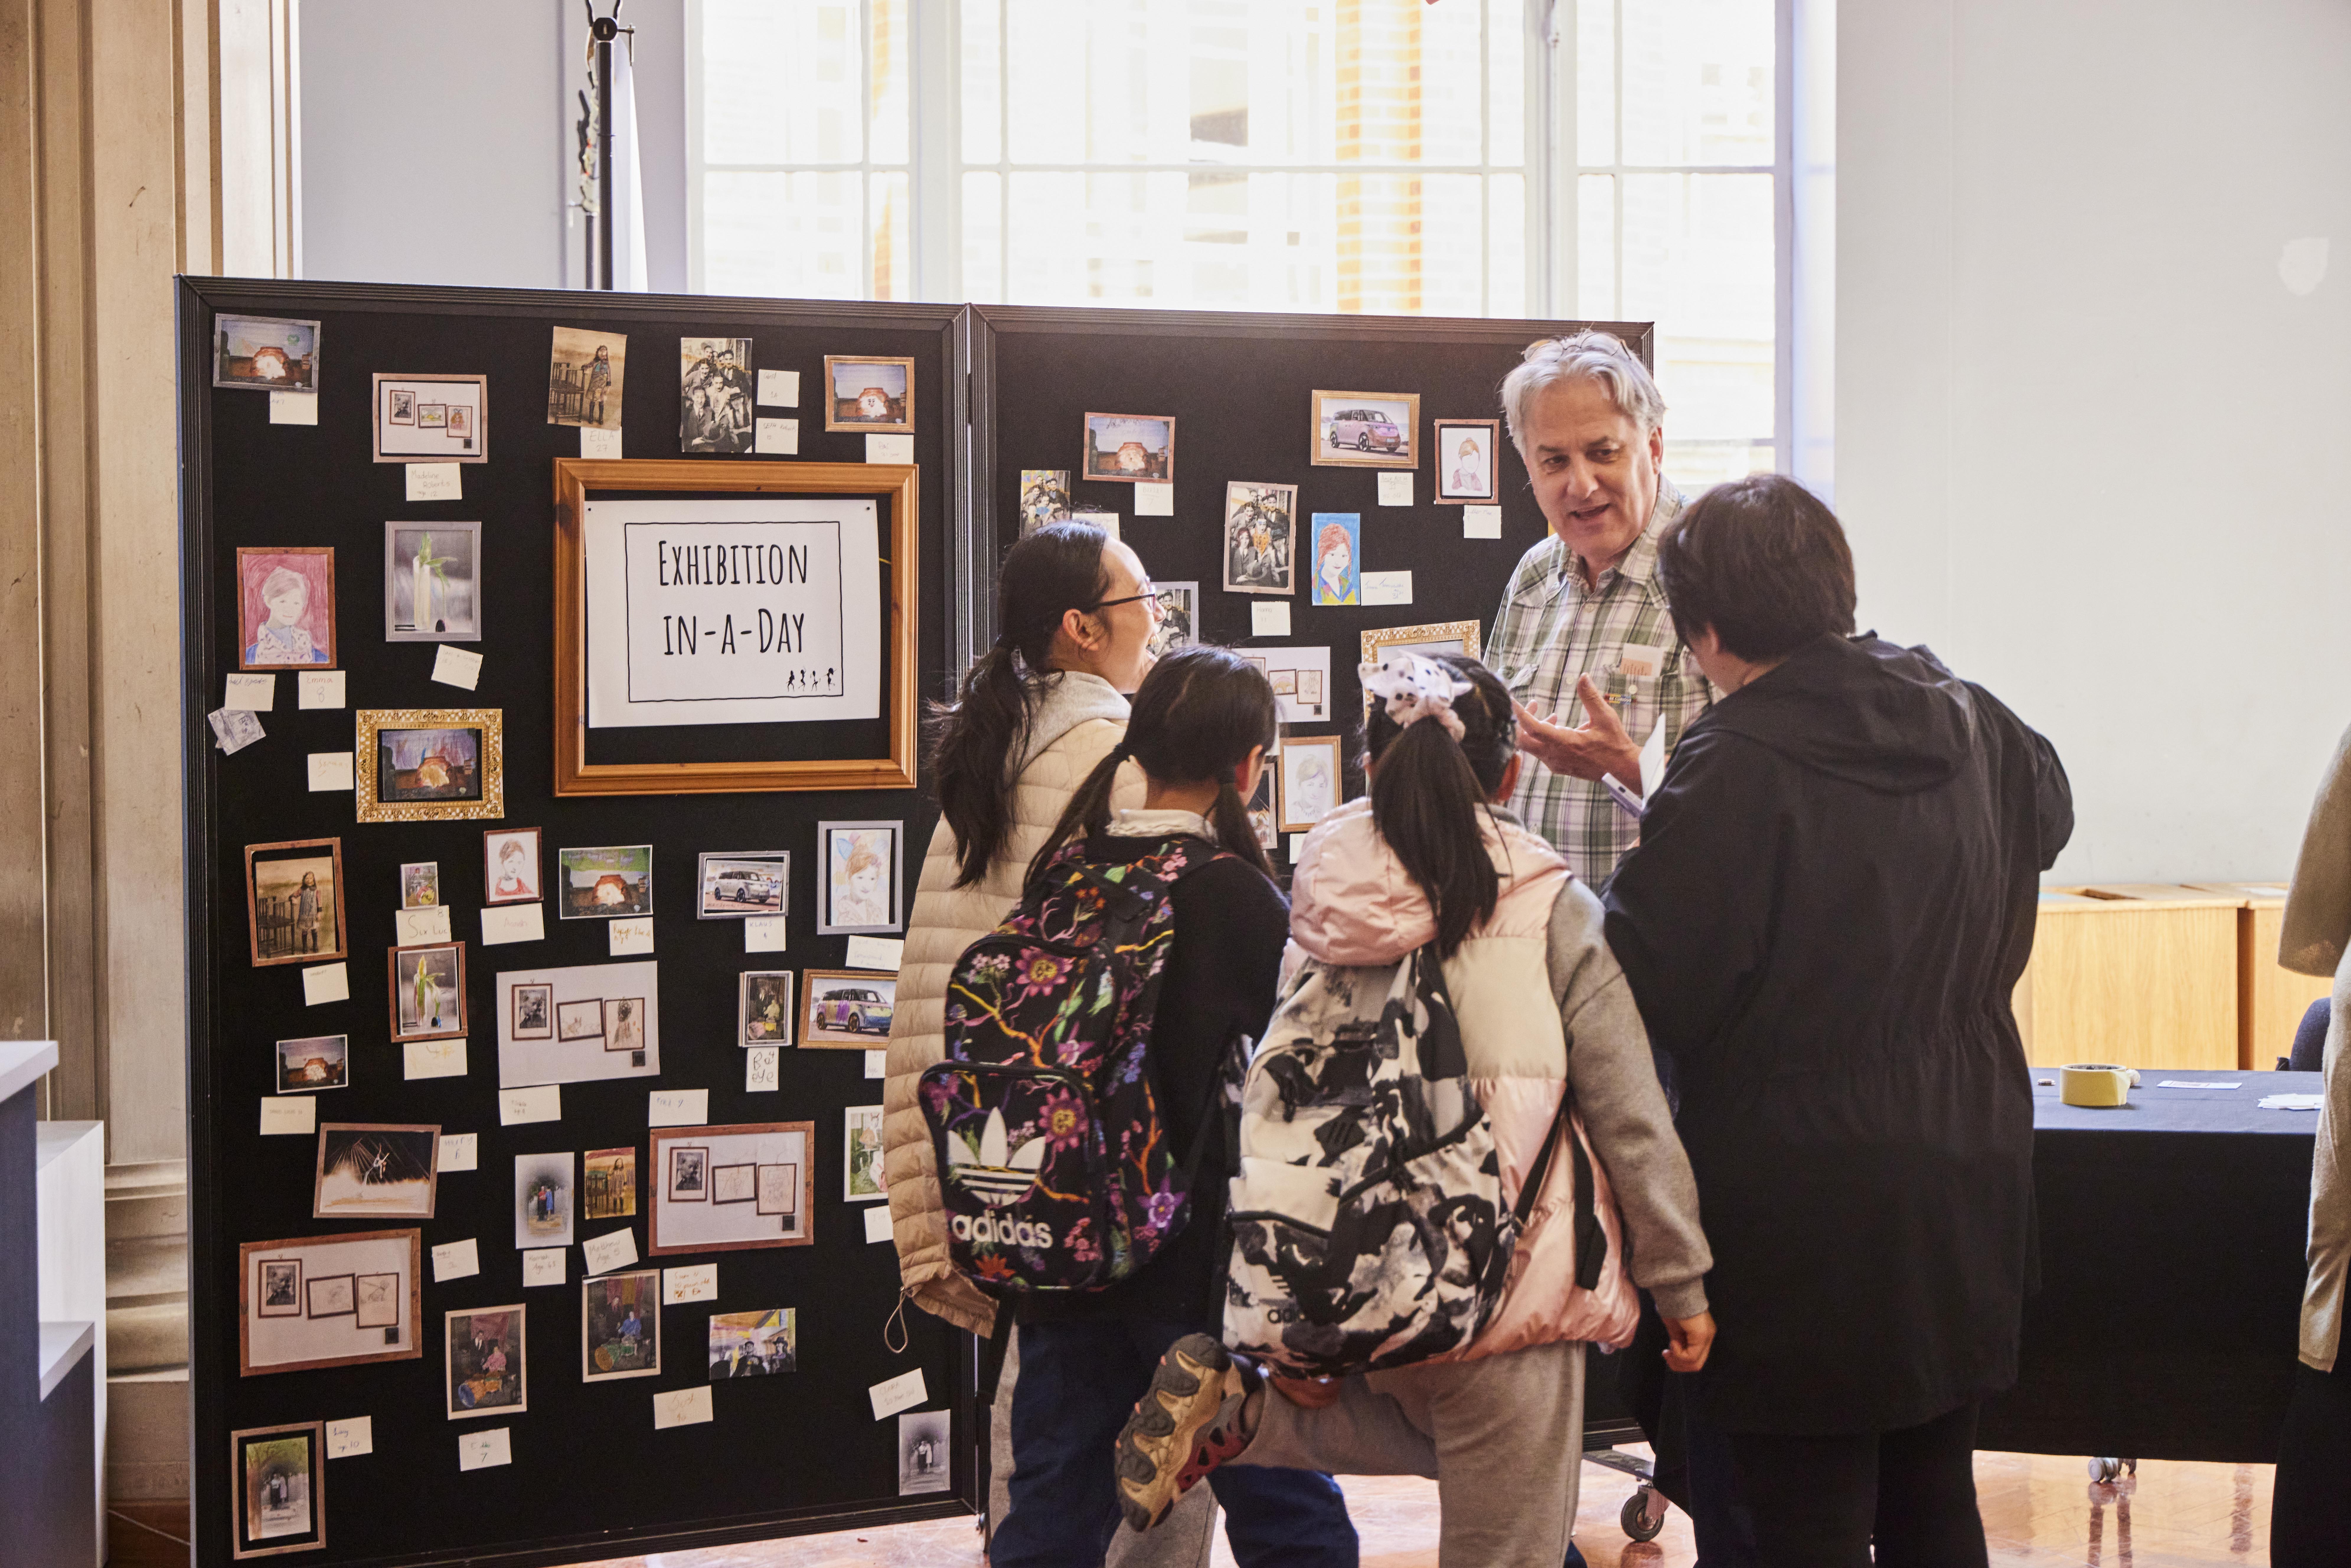 A family looking at a board titled 'Exhibition in a Day', which has photographs pinned all over it.